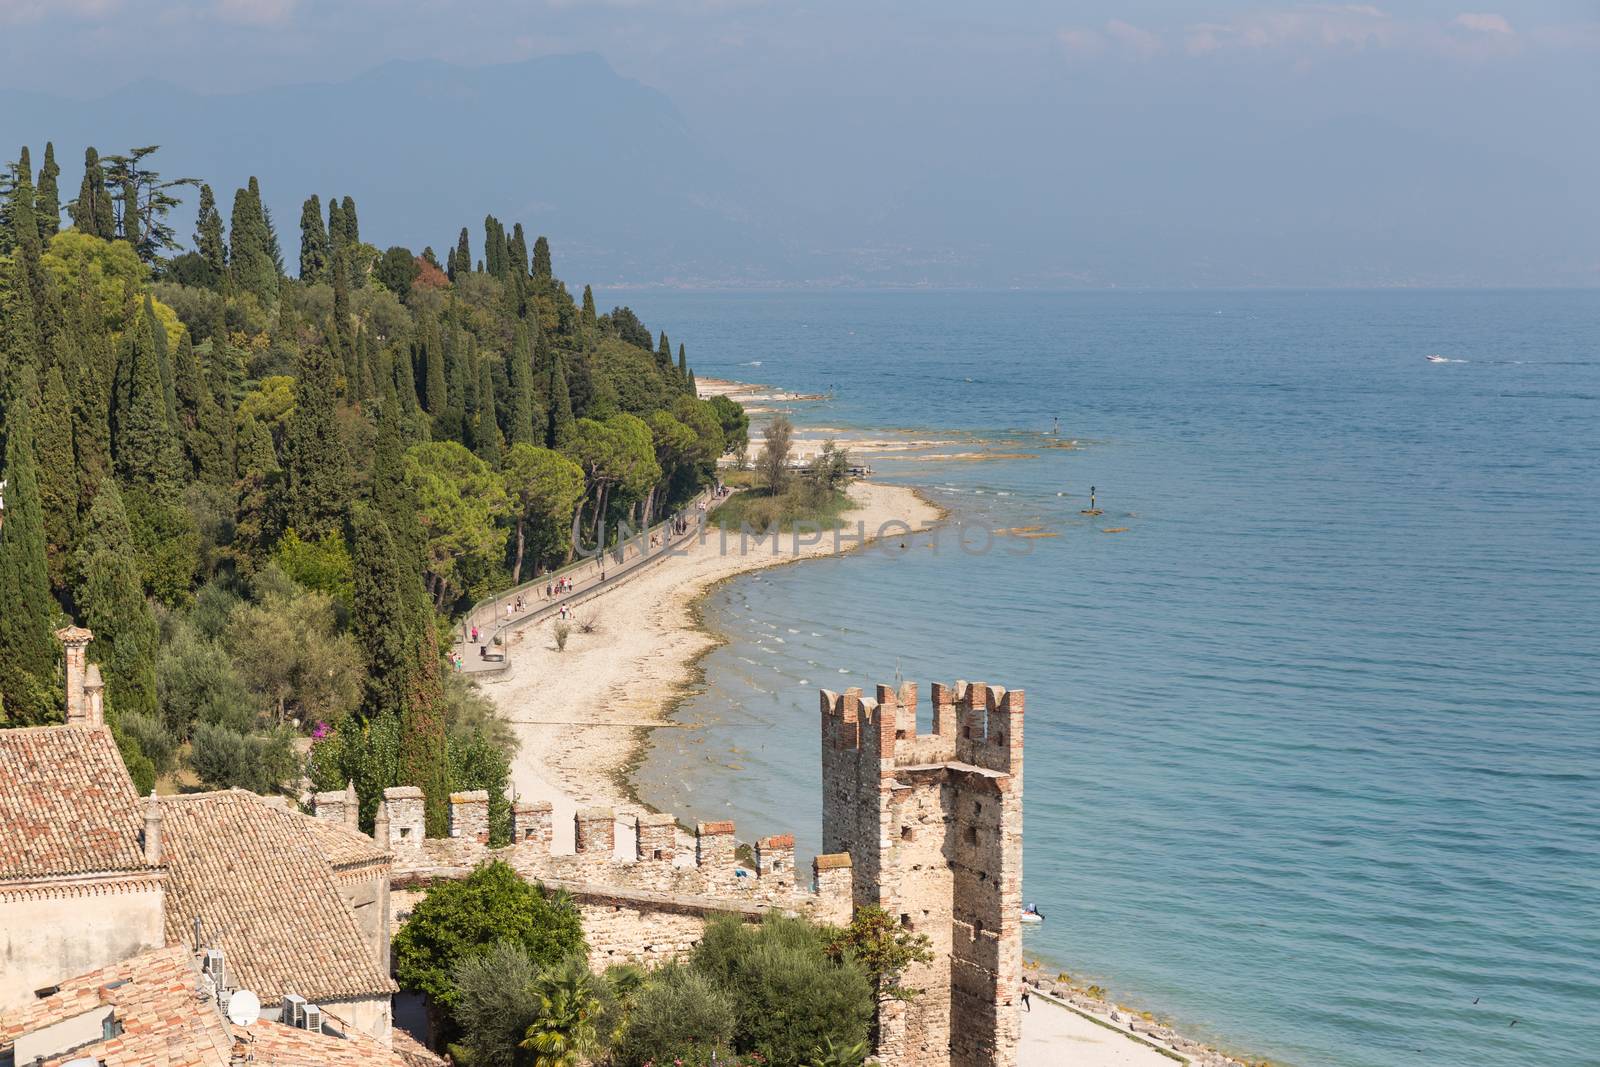 The fortress walls of Castello Scaligero in Sirmione on Lake Gar by chrisukphoto